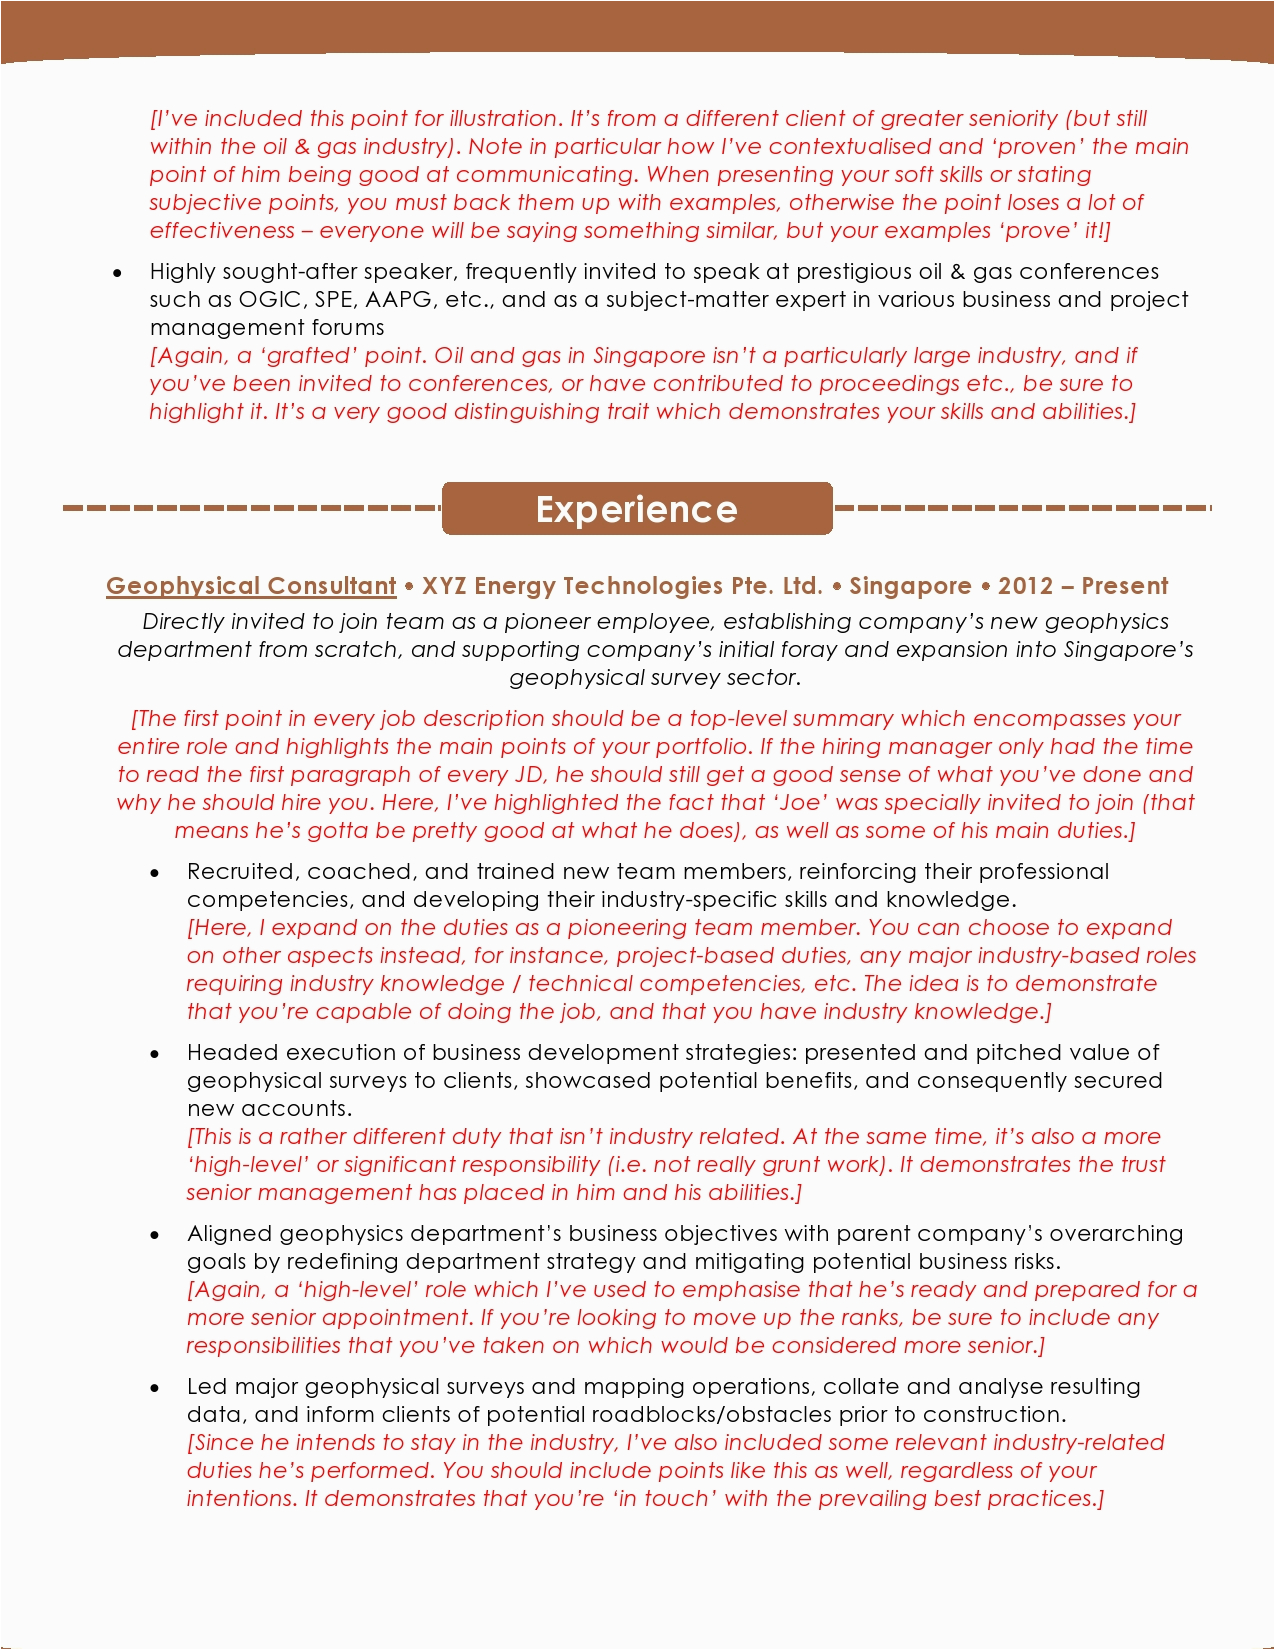 Sample Resume for Oil and Gas Job Oil and Gas Resume Sample & Template Resumewriter Sg